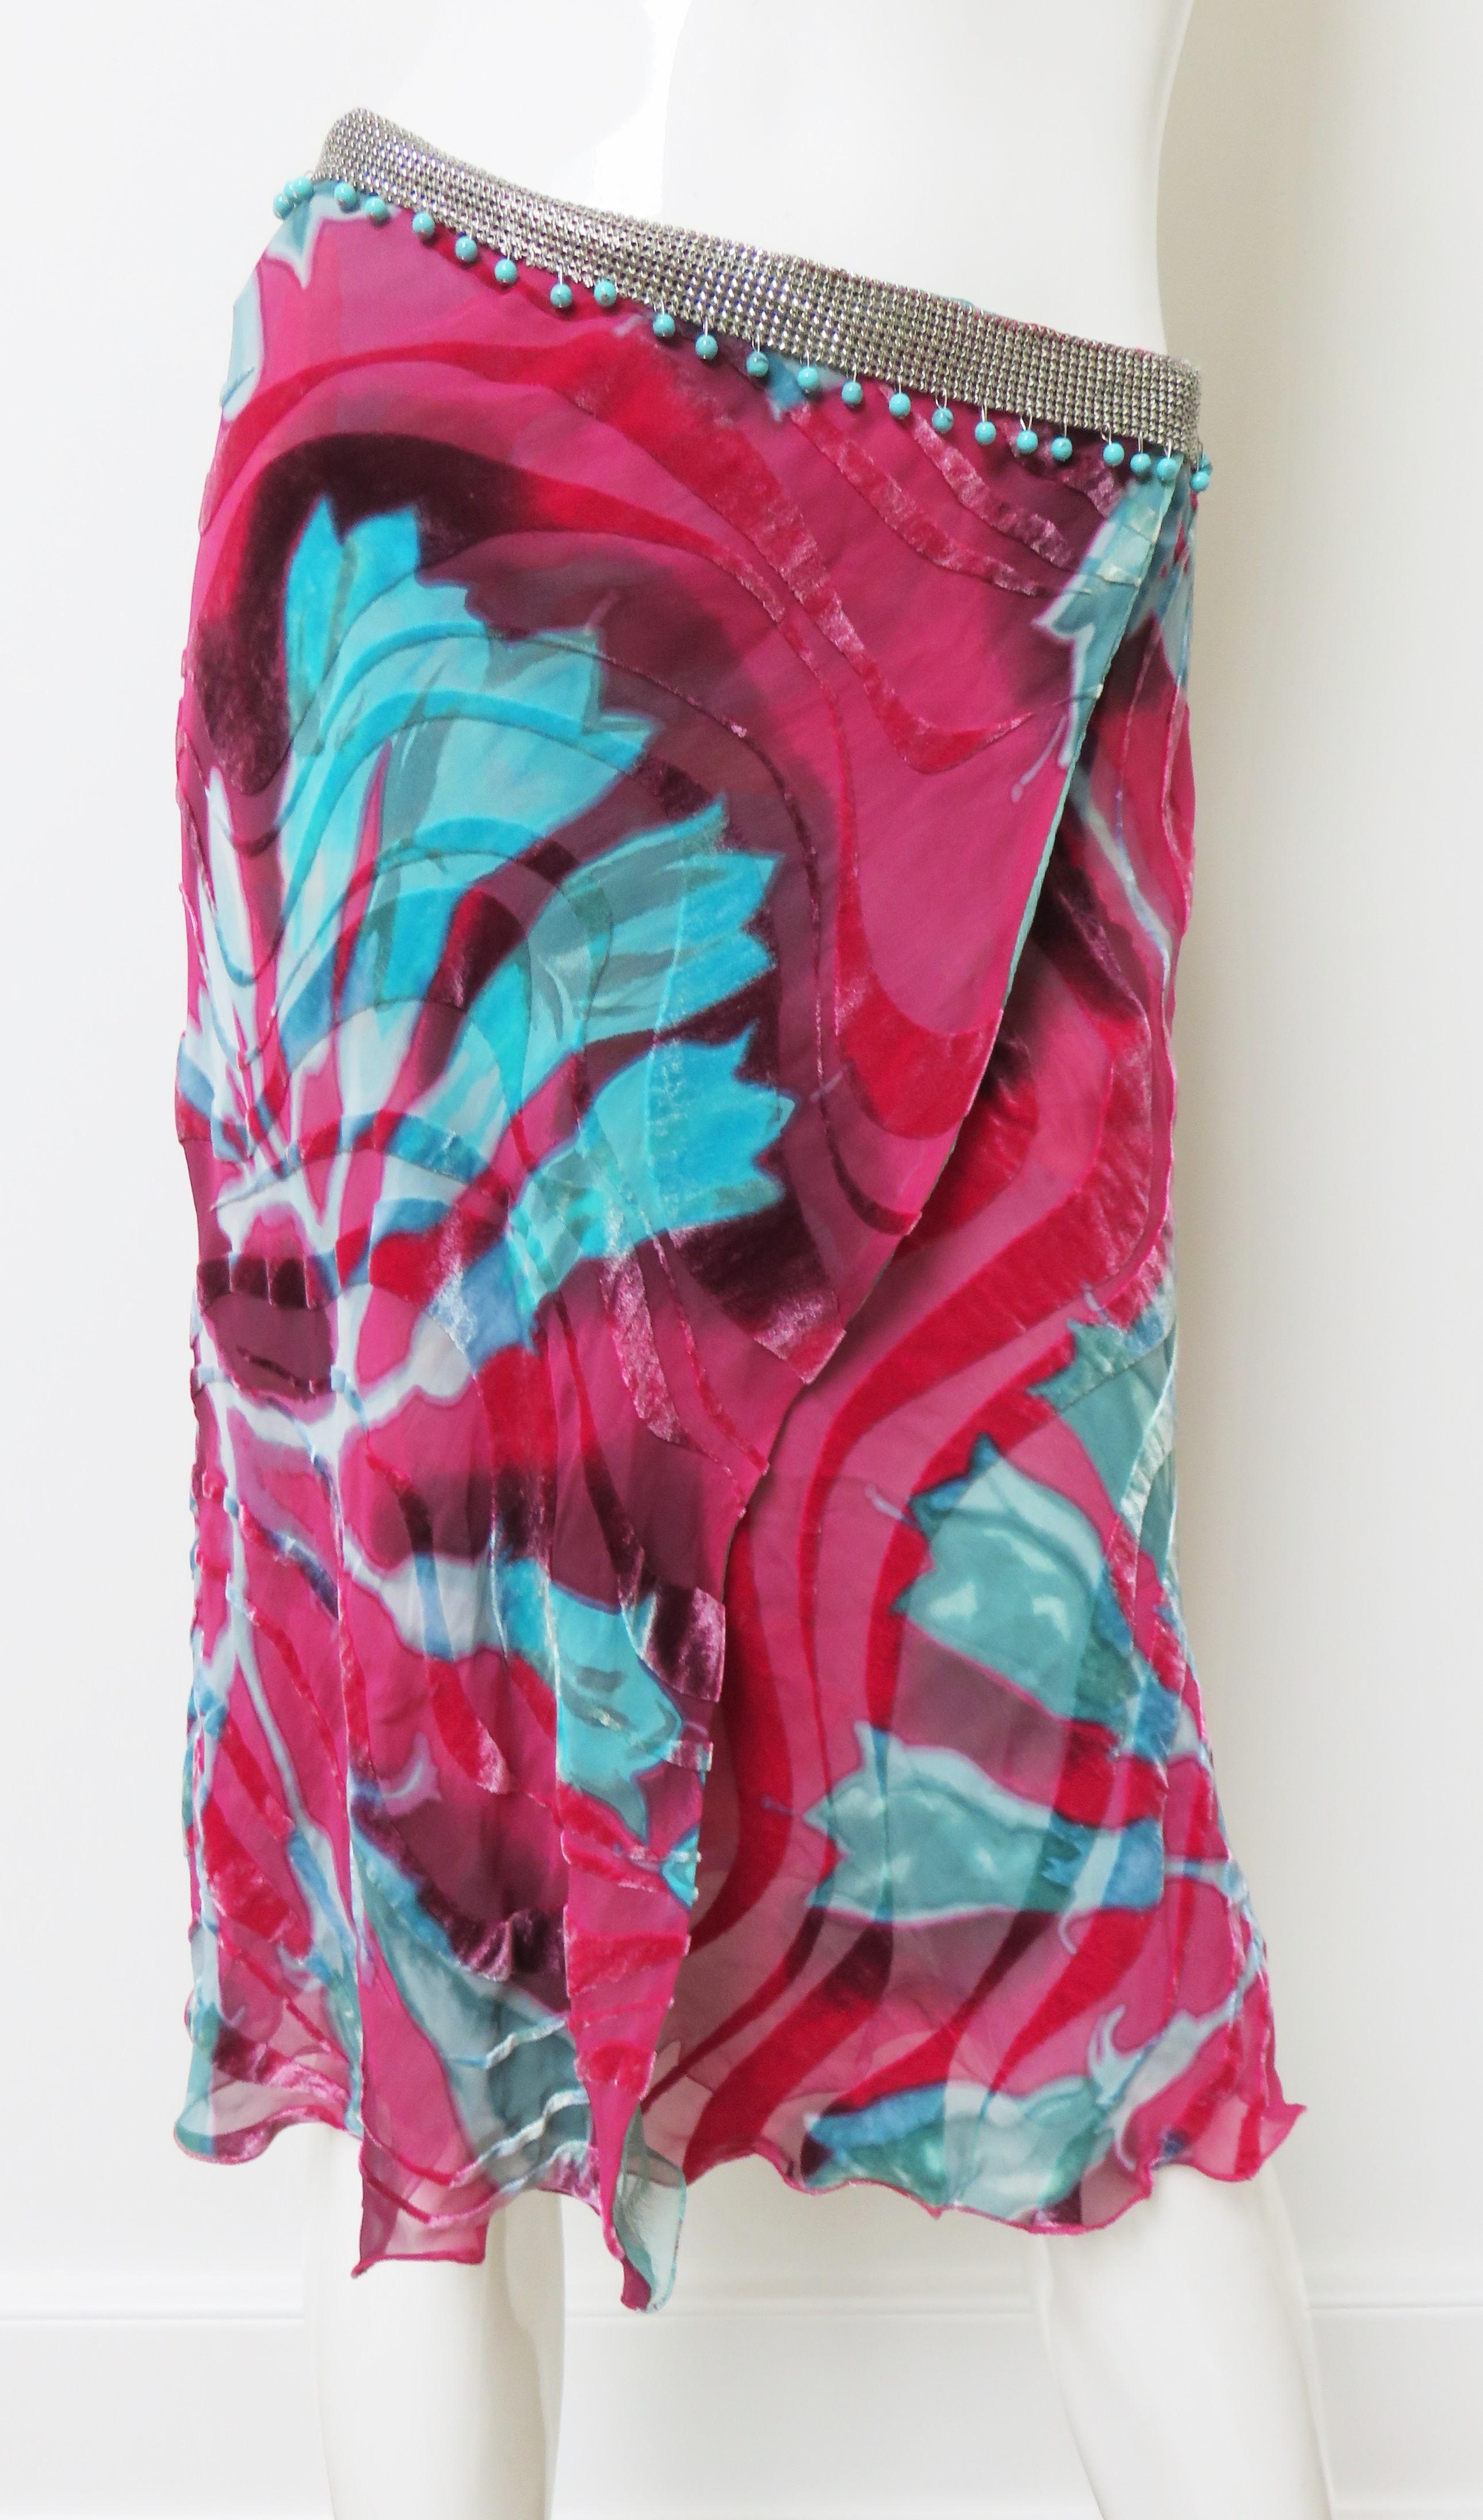 A gorgeous cut velvet wrap skirt by Gianni Versace in a beautiful bold pink and turquoise flower pattern.   It has an metal mesh or chain mail band around the waist with dangling turquoise beads.  It wraps closing at the waist with silk covered